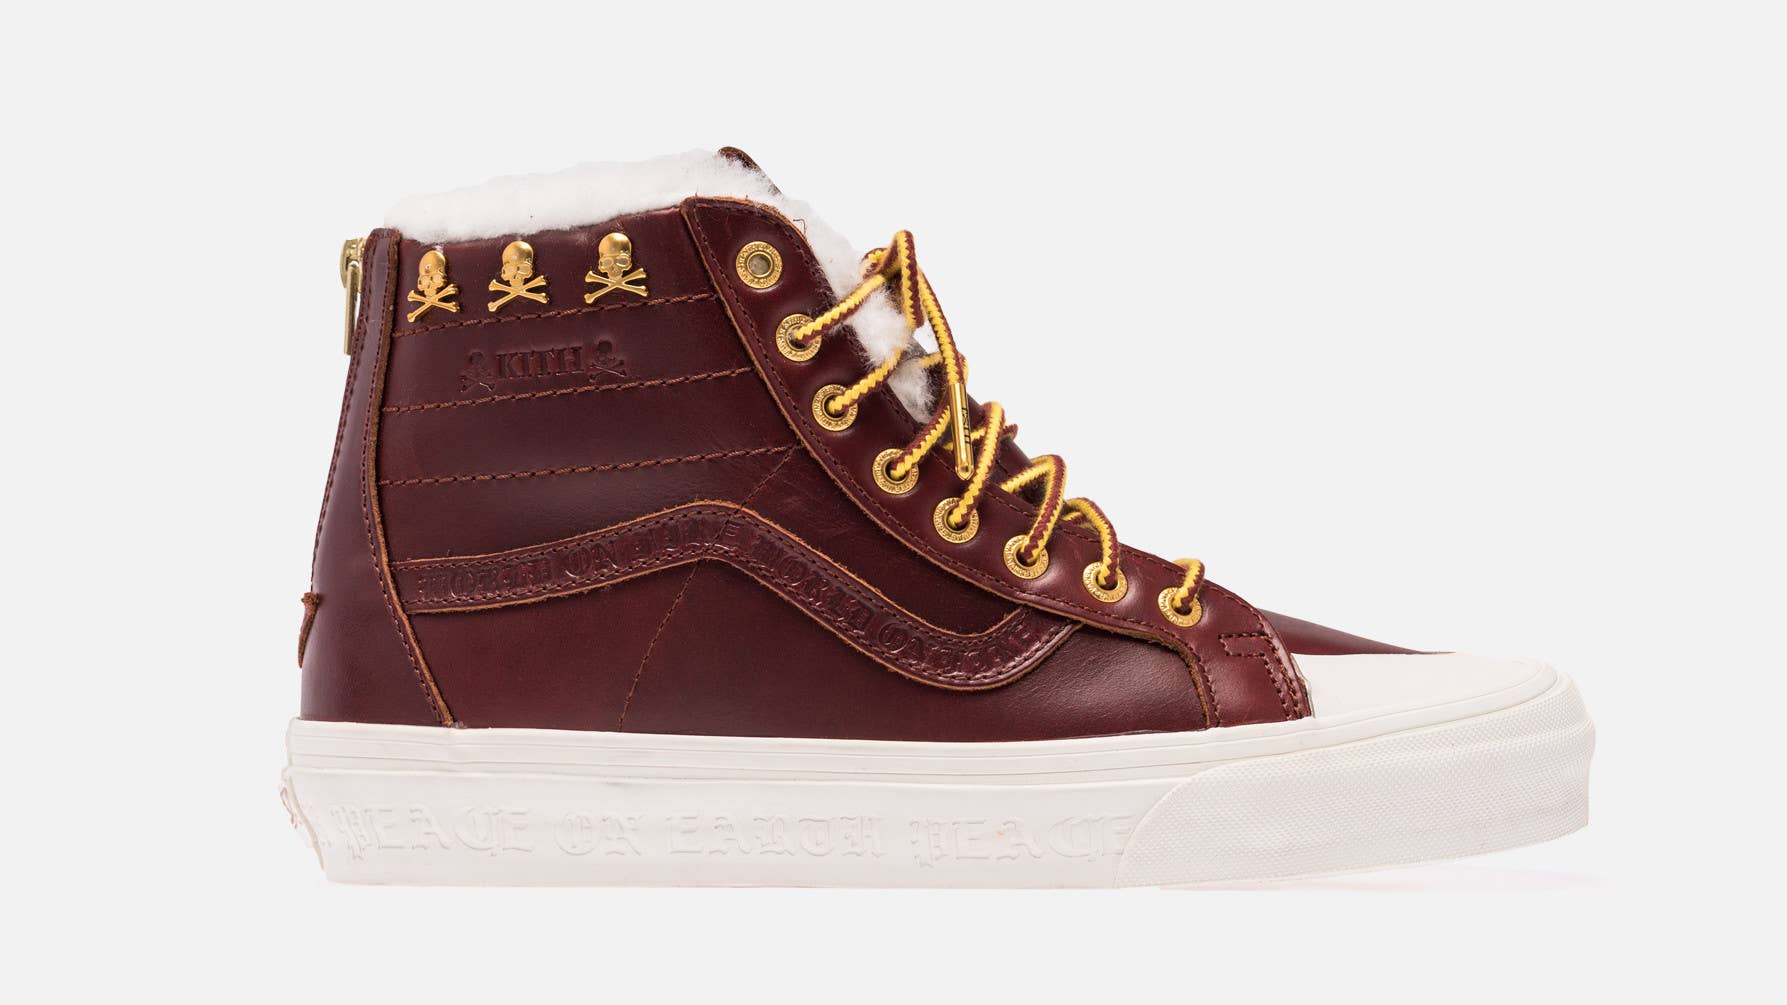 Kith and Vans' New Collab Releases Next Week